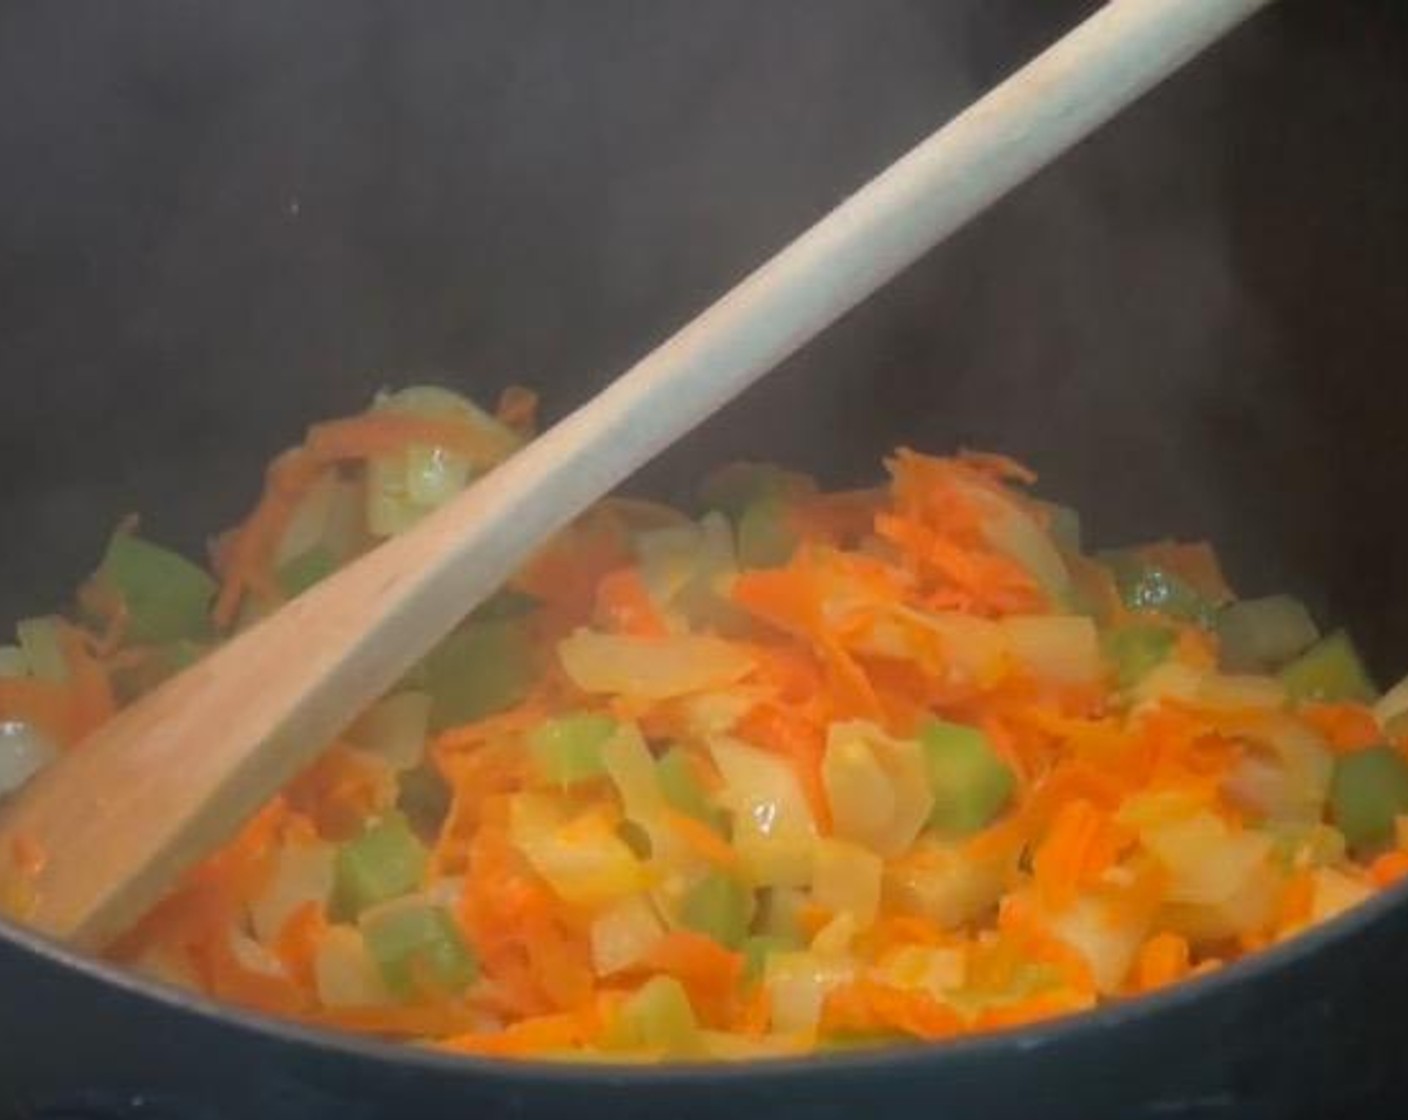 step 1 In a pot, add Olive Oil (as needed), Garlic (2 cloves), Yellow Onion (1), Celery (2 stalks), and Carrot (1). Cook over medium-high heat for 5 minutes, or until onions have softened.